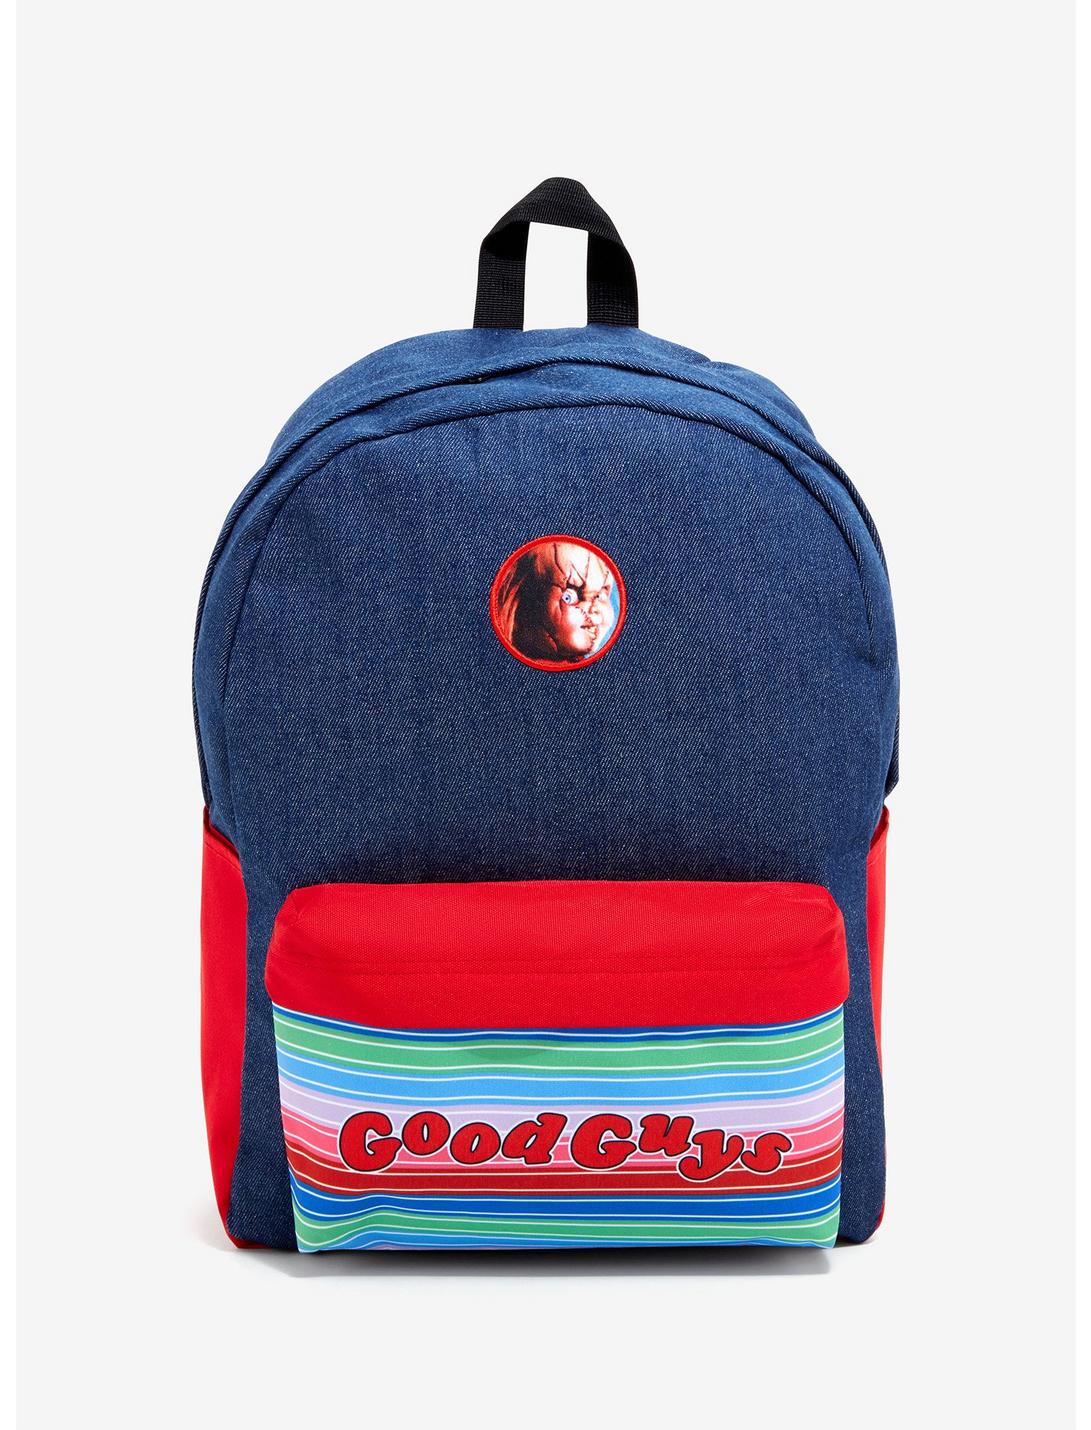 Child's Play Chucky Good Guys Backpack, , hi-res